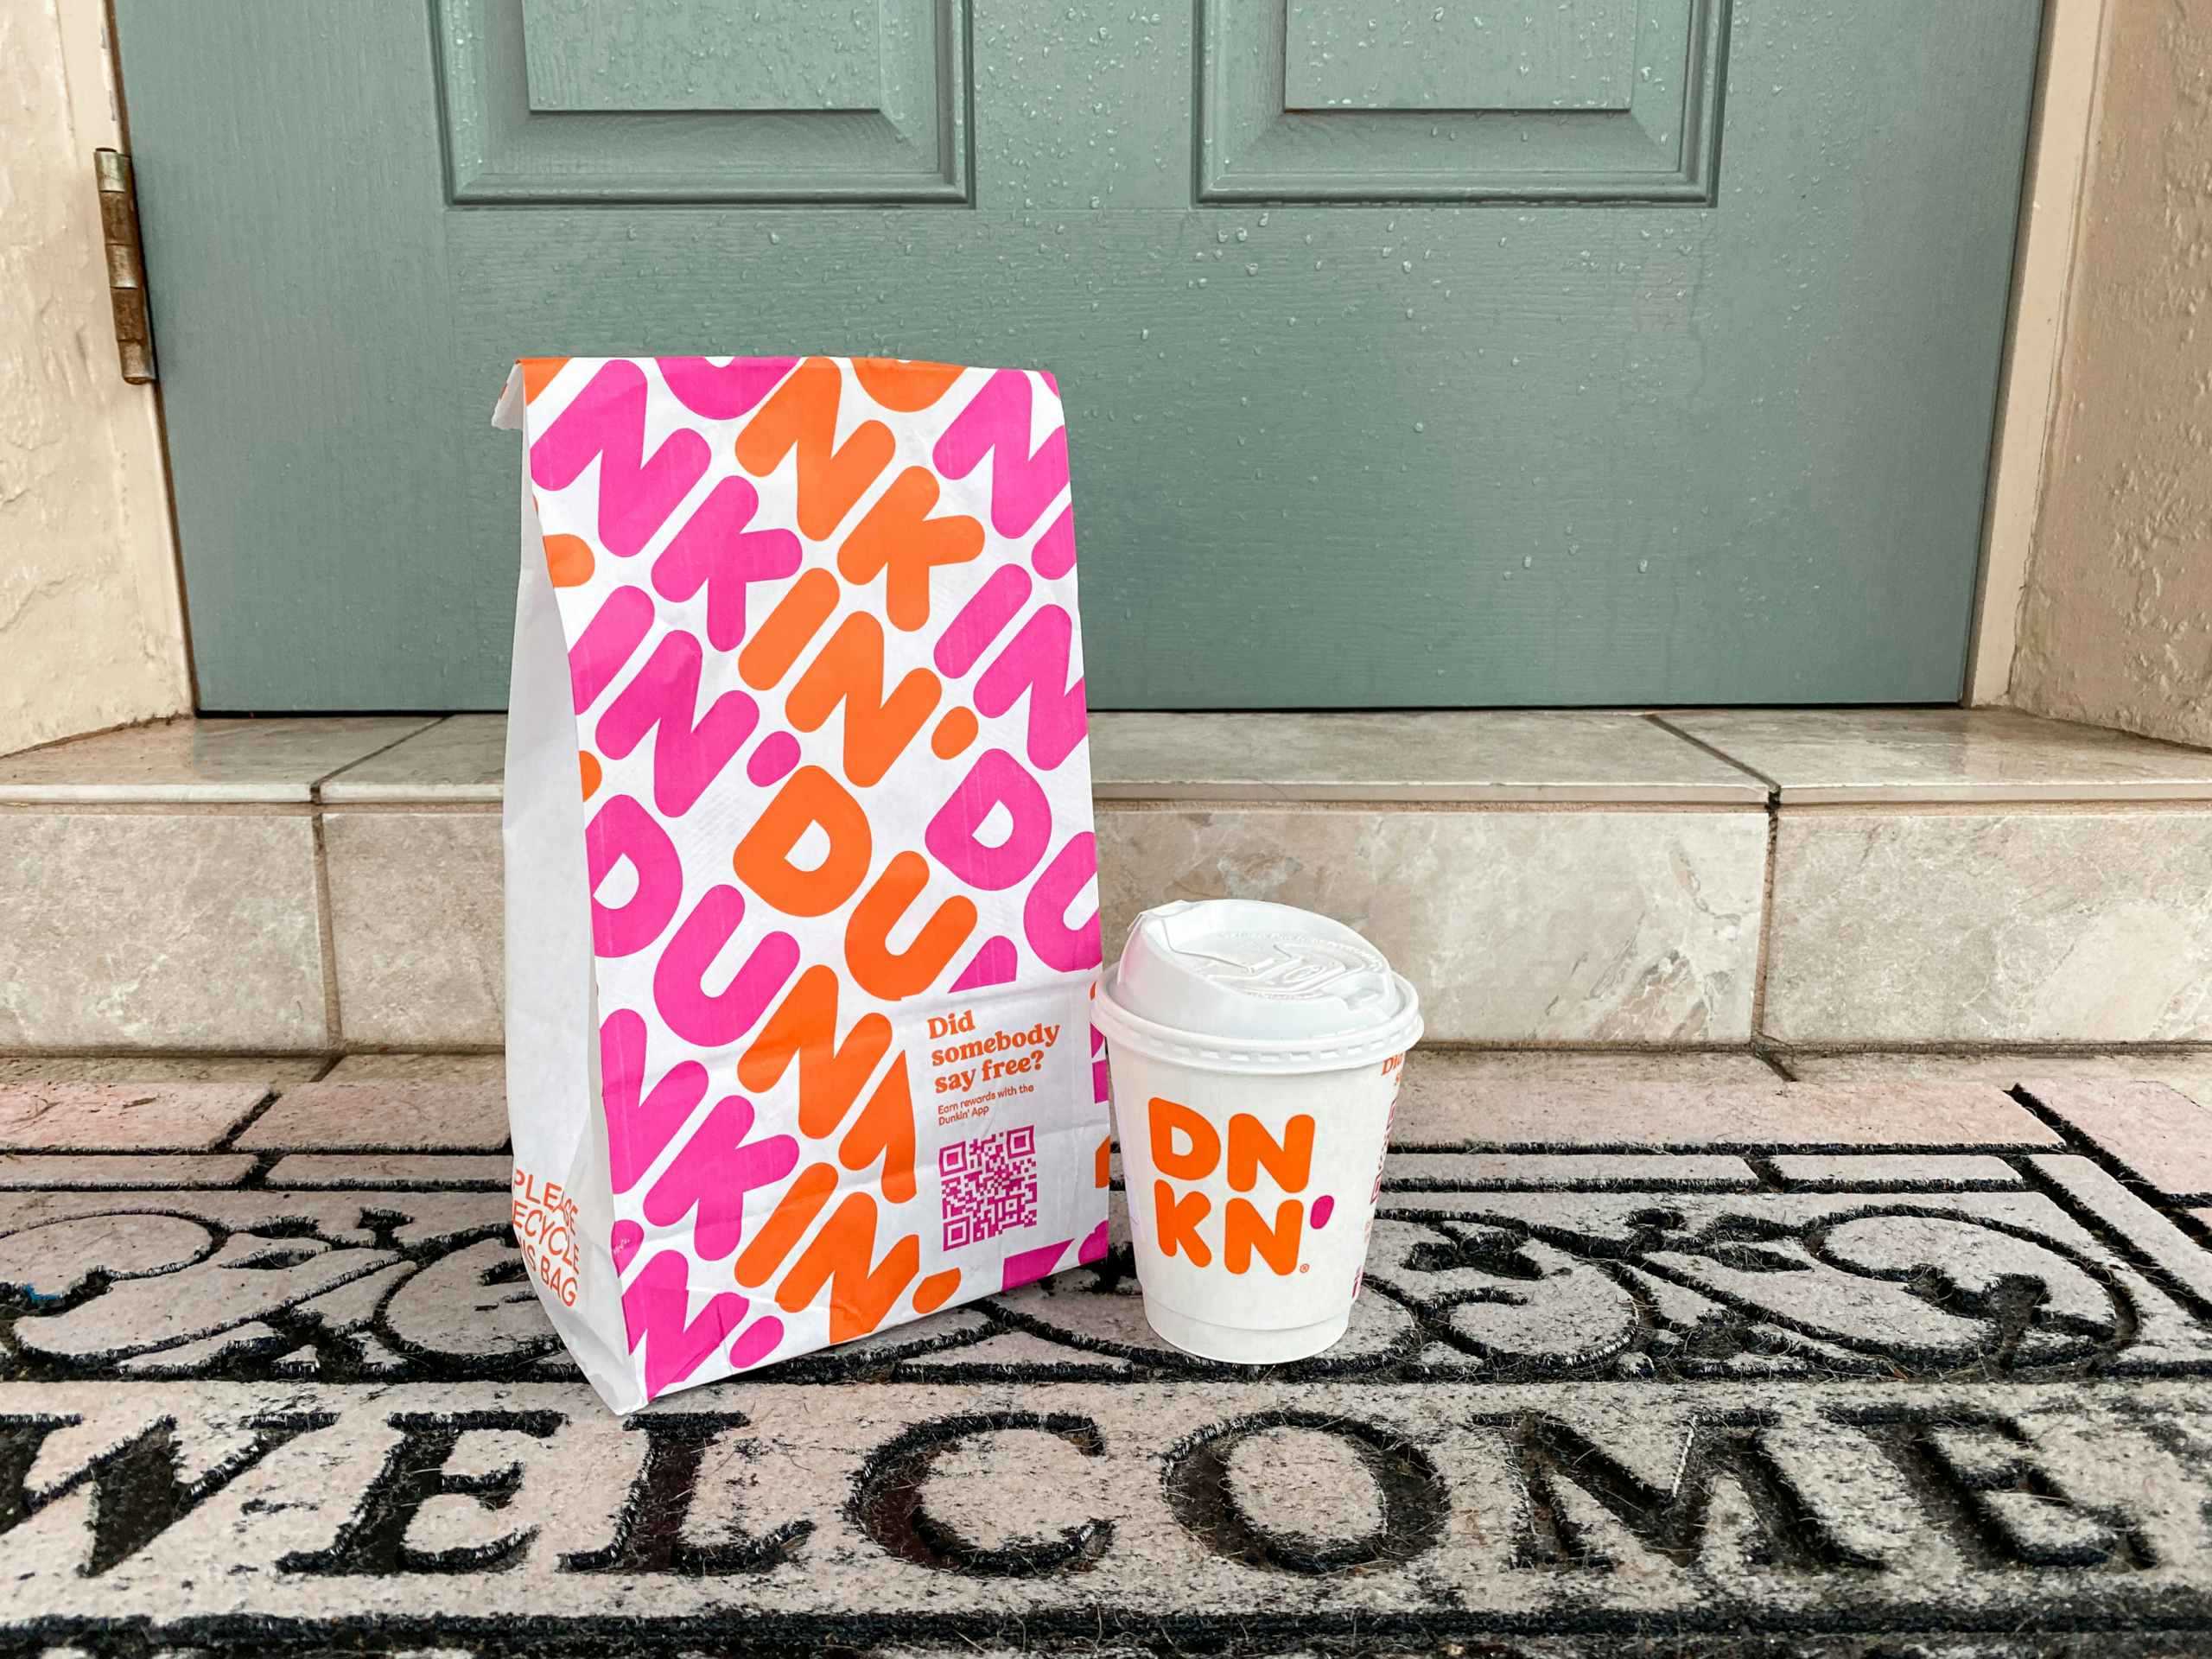 dunkin-donuts-uber-eats-door-dash-front-porch-delivery-bag-coffee-2022-2-kcl-lp